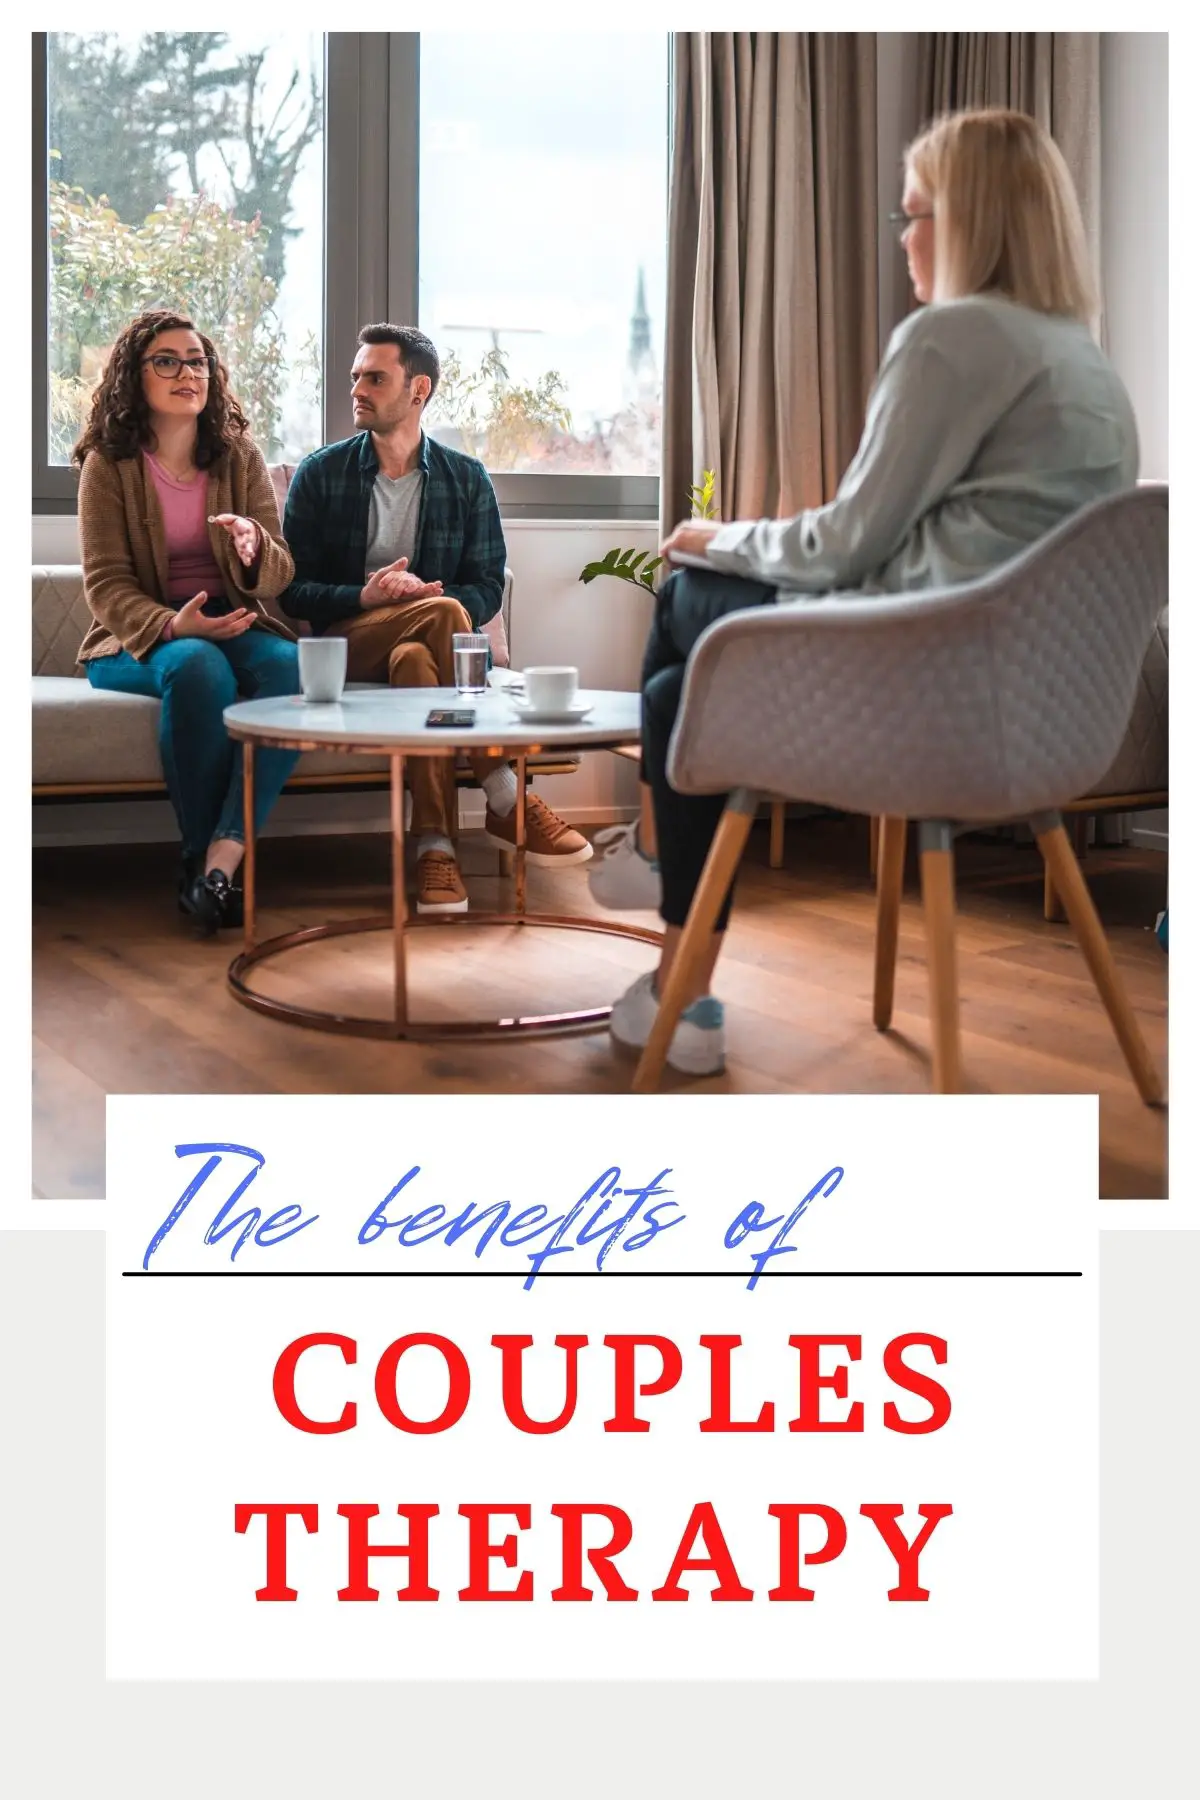 The benefits of couples therapy